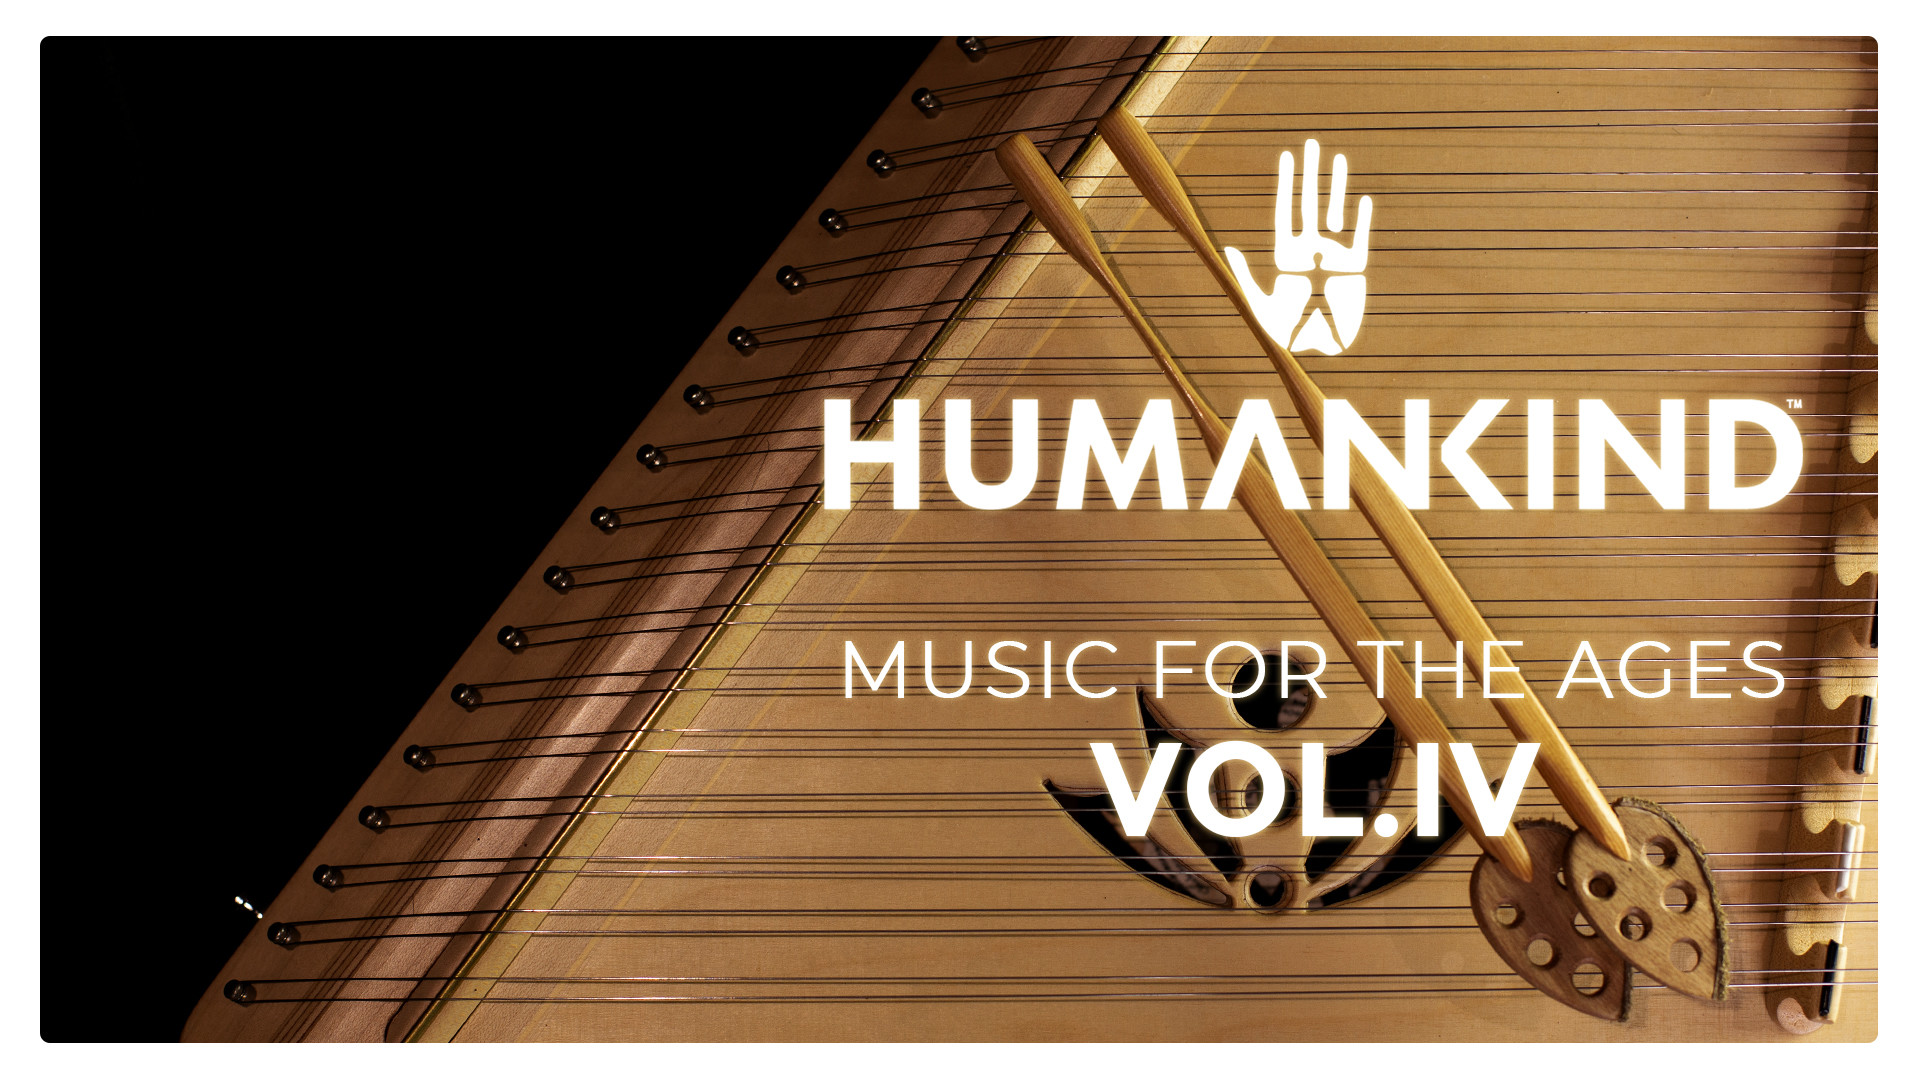 HUMANKIND™ - Music for the Ages, Vol. IV Featured Screenshot #1